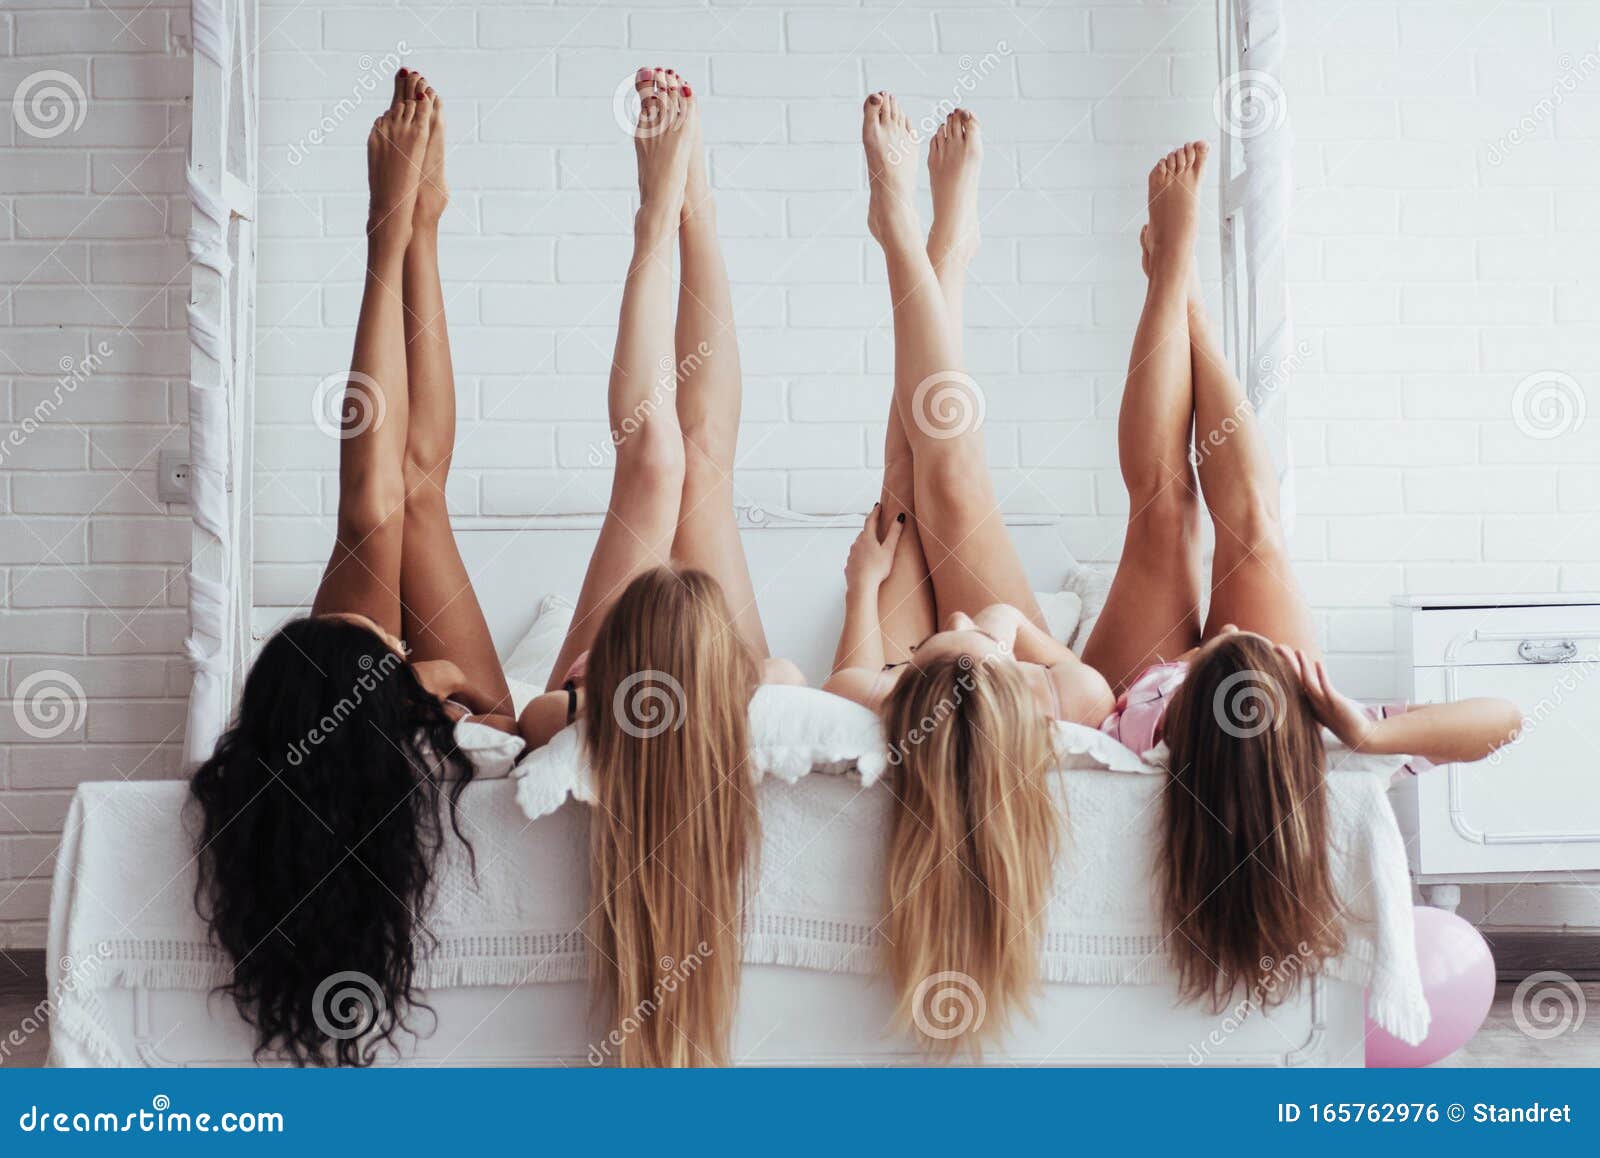 beautiful youth. four young women with good body  lying on the bed with their legs up